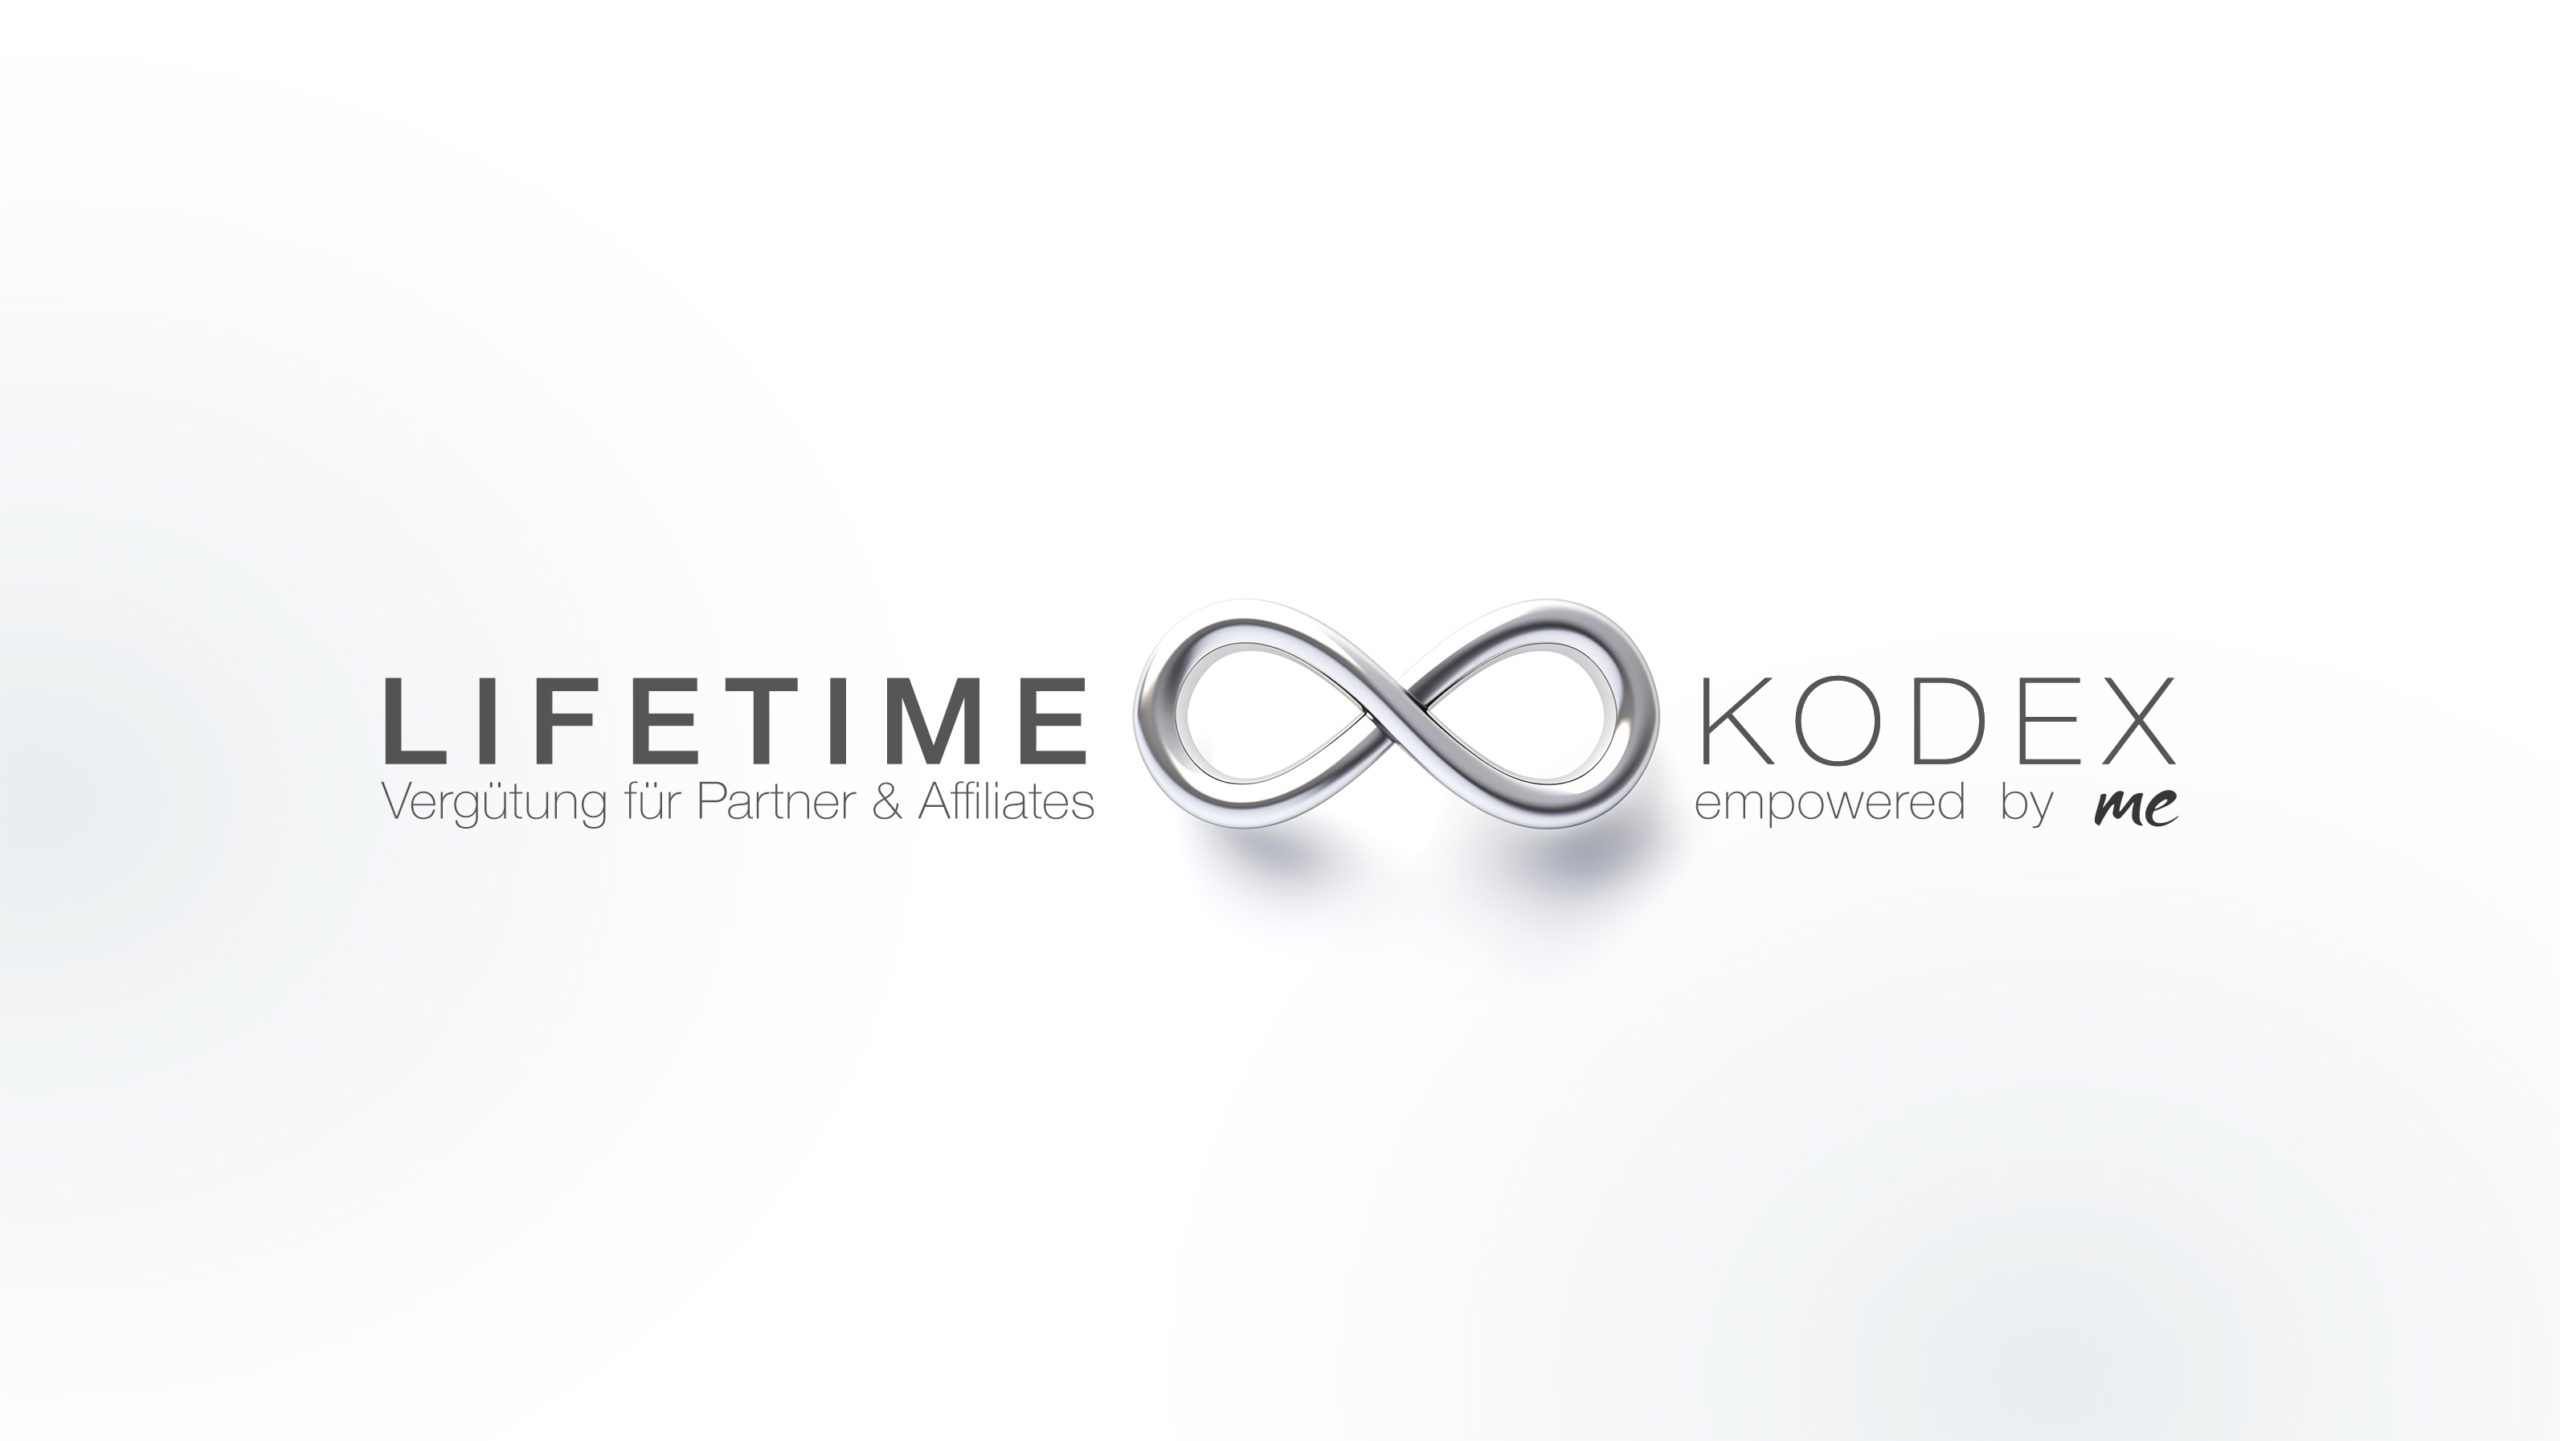 Der Lifetime Provision Kodex - empowered by ME